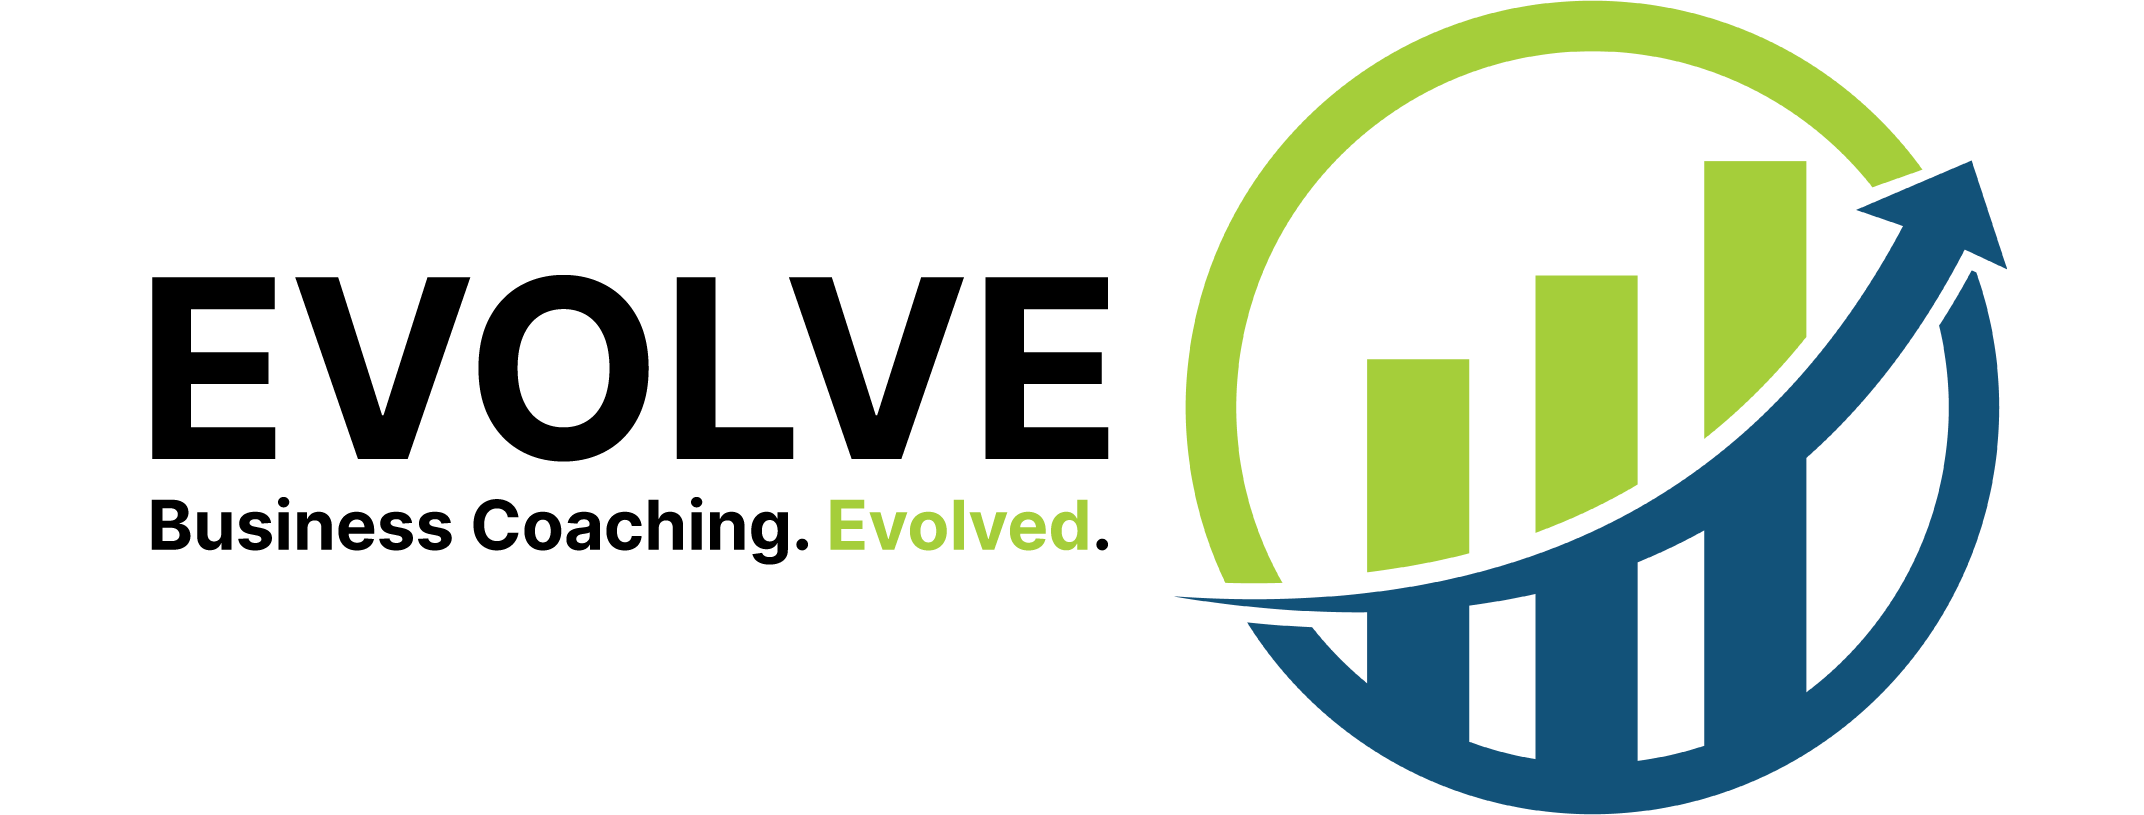 Evolve Business Coaching. Evolved.